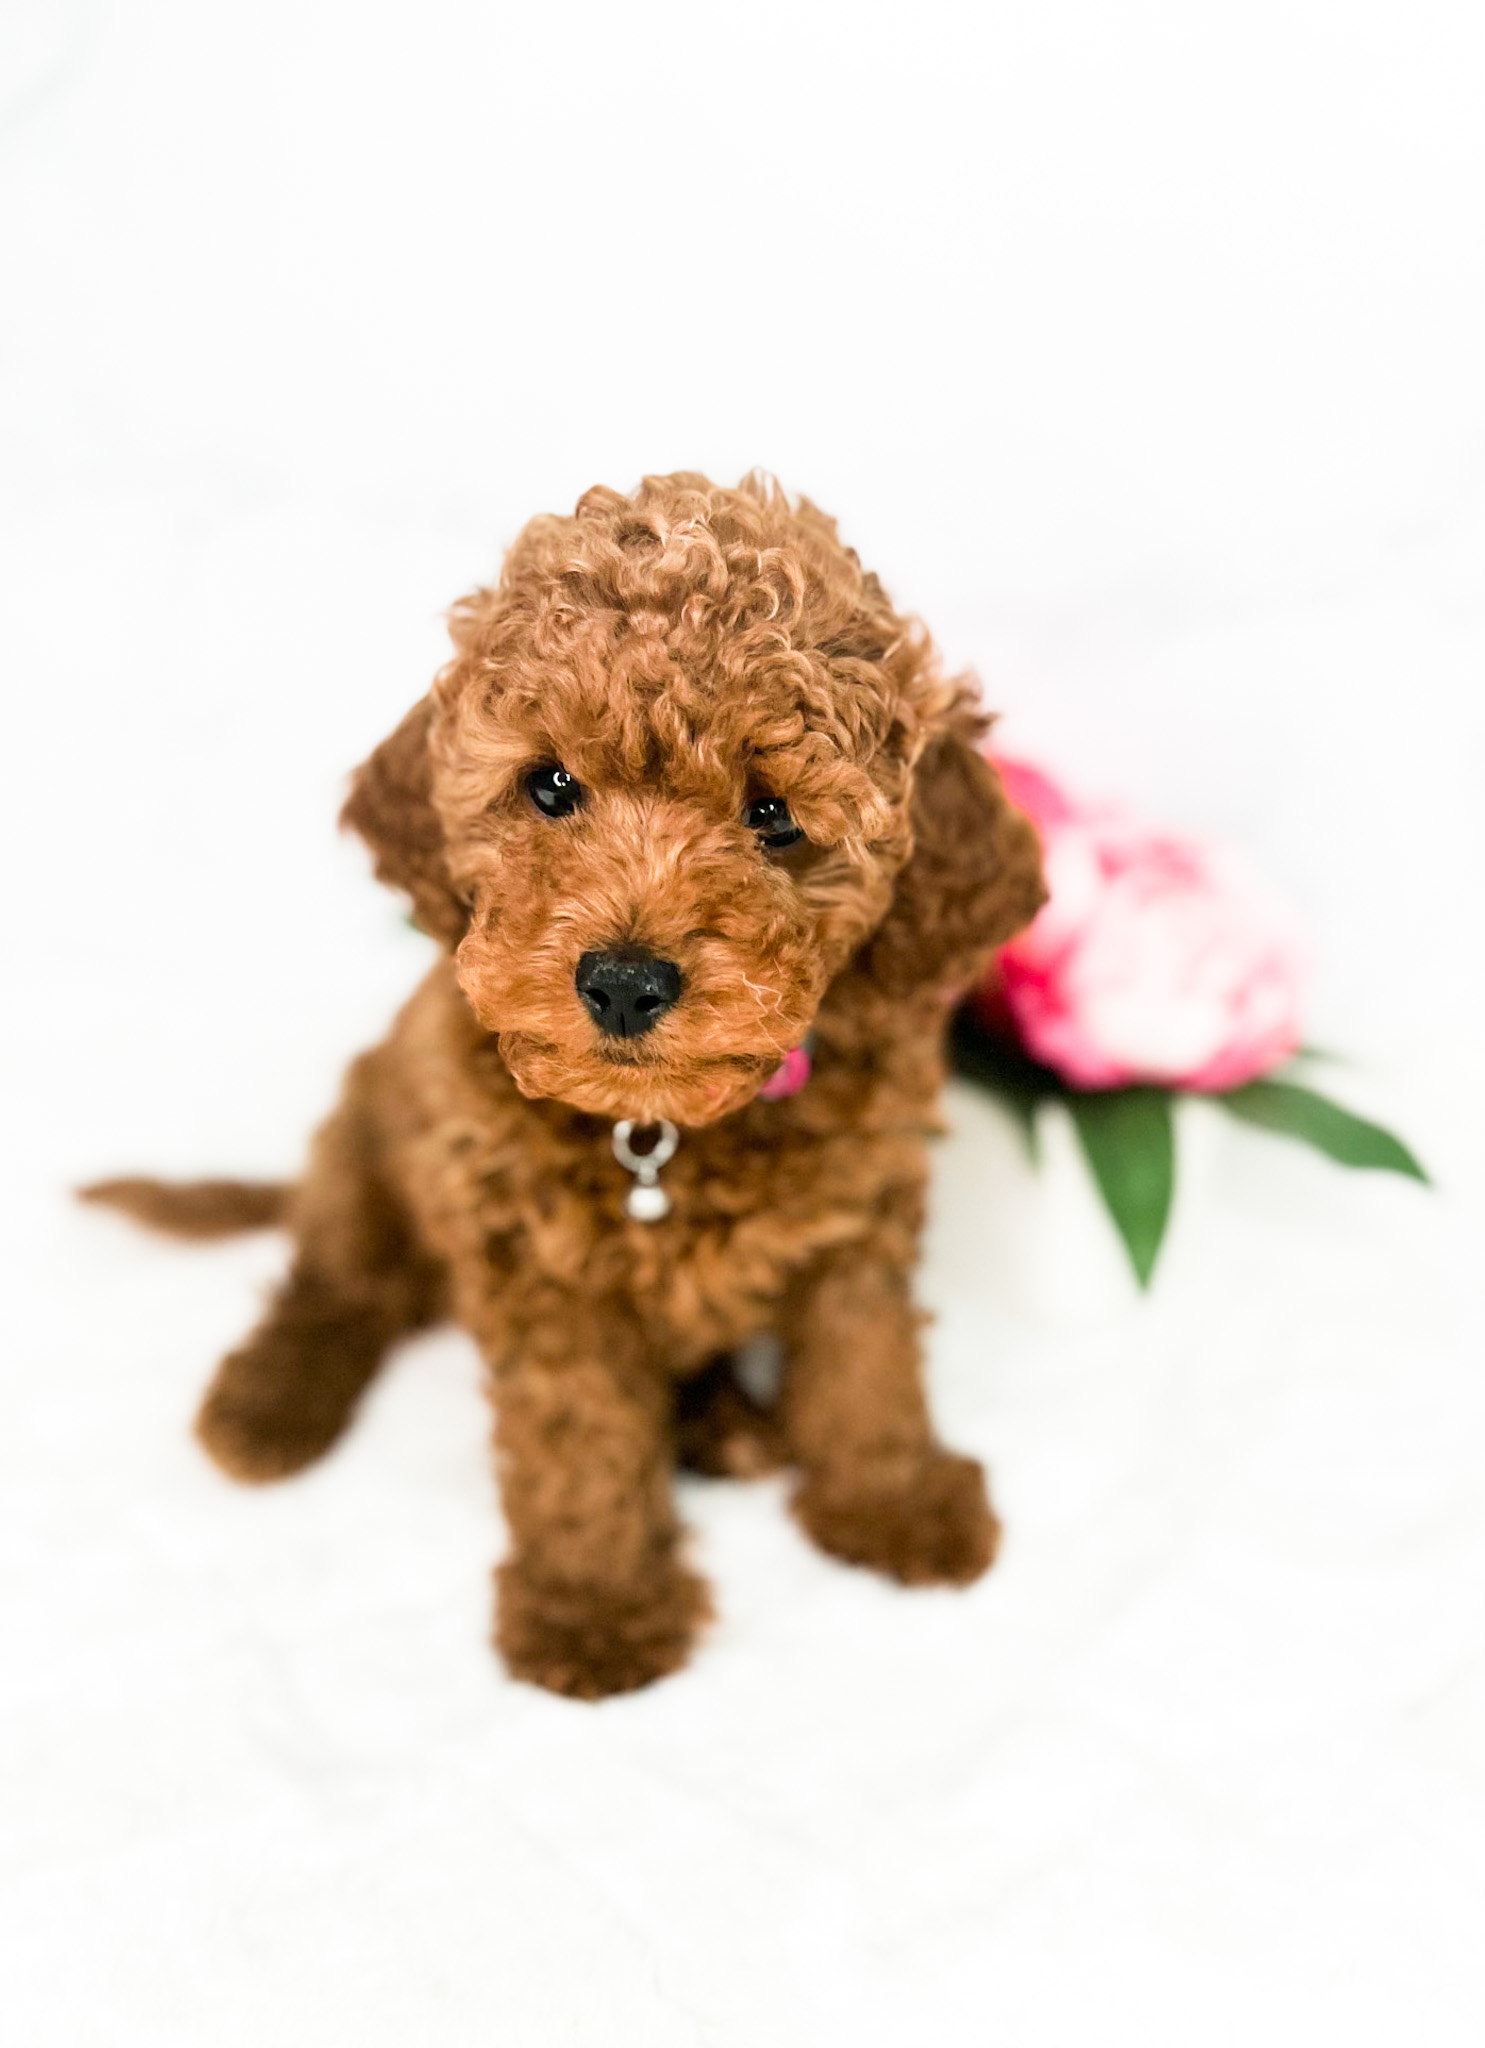 A small brown toy poodle puppy sits gracefully in front of a delicate pink flower, showcasing its adorable presence.